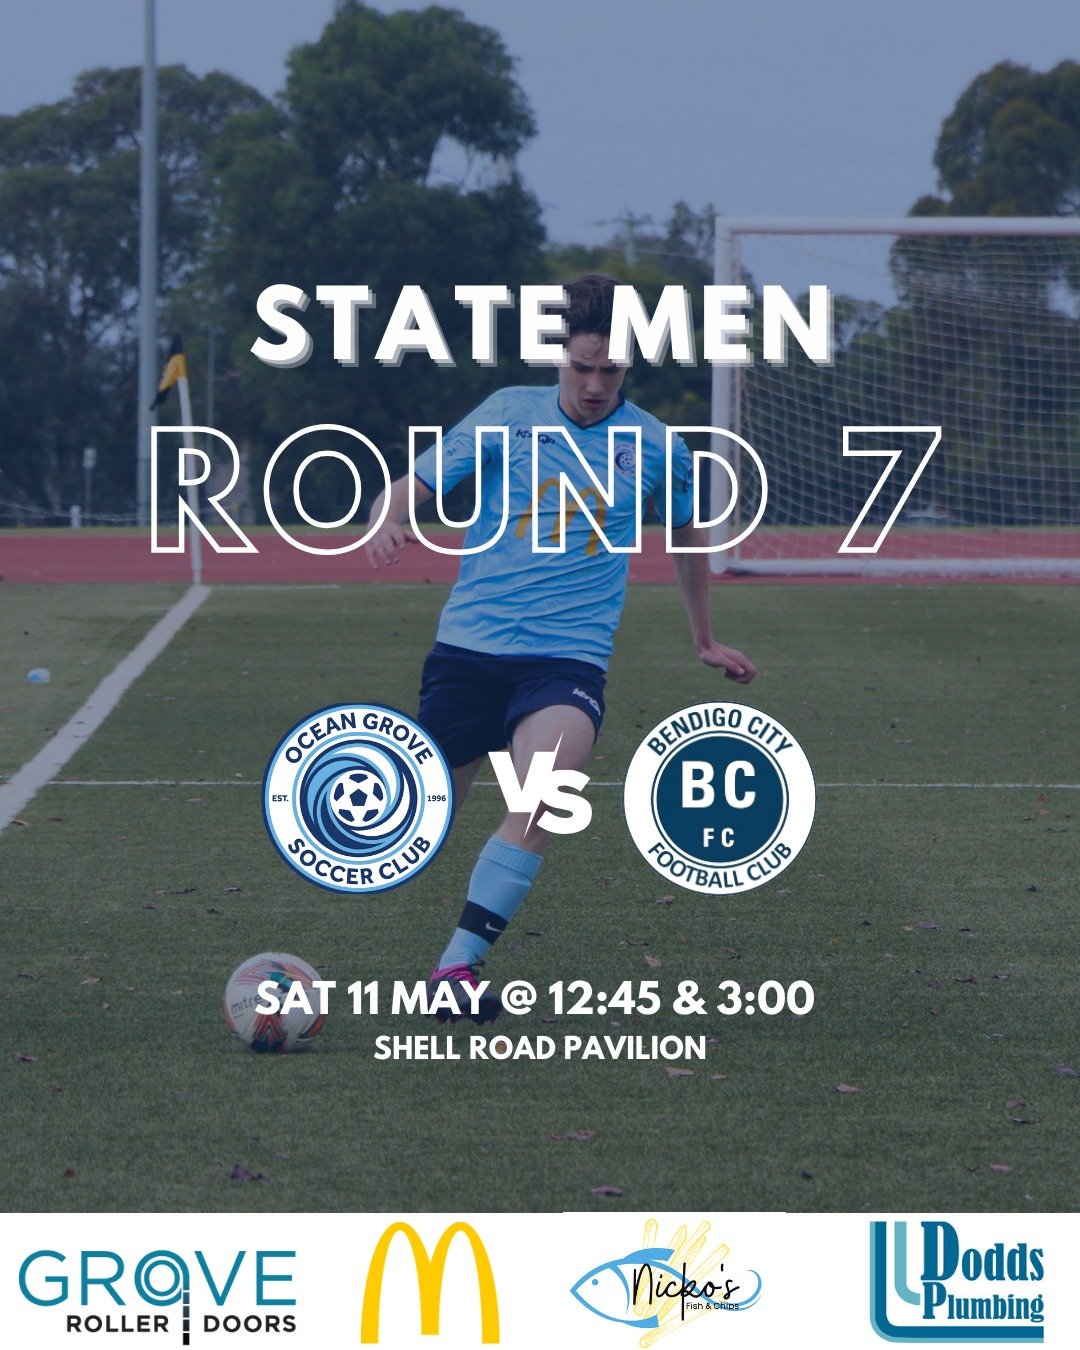 Our State Men kick off Round 7 at home tomorrow afternoon against @bendigocityfc.  The Reserve game starts at 12:45, and the Senior game starts at 3:00. Canteen will be open, come down and support your Ocean Grove SC!